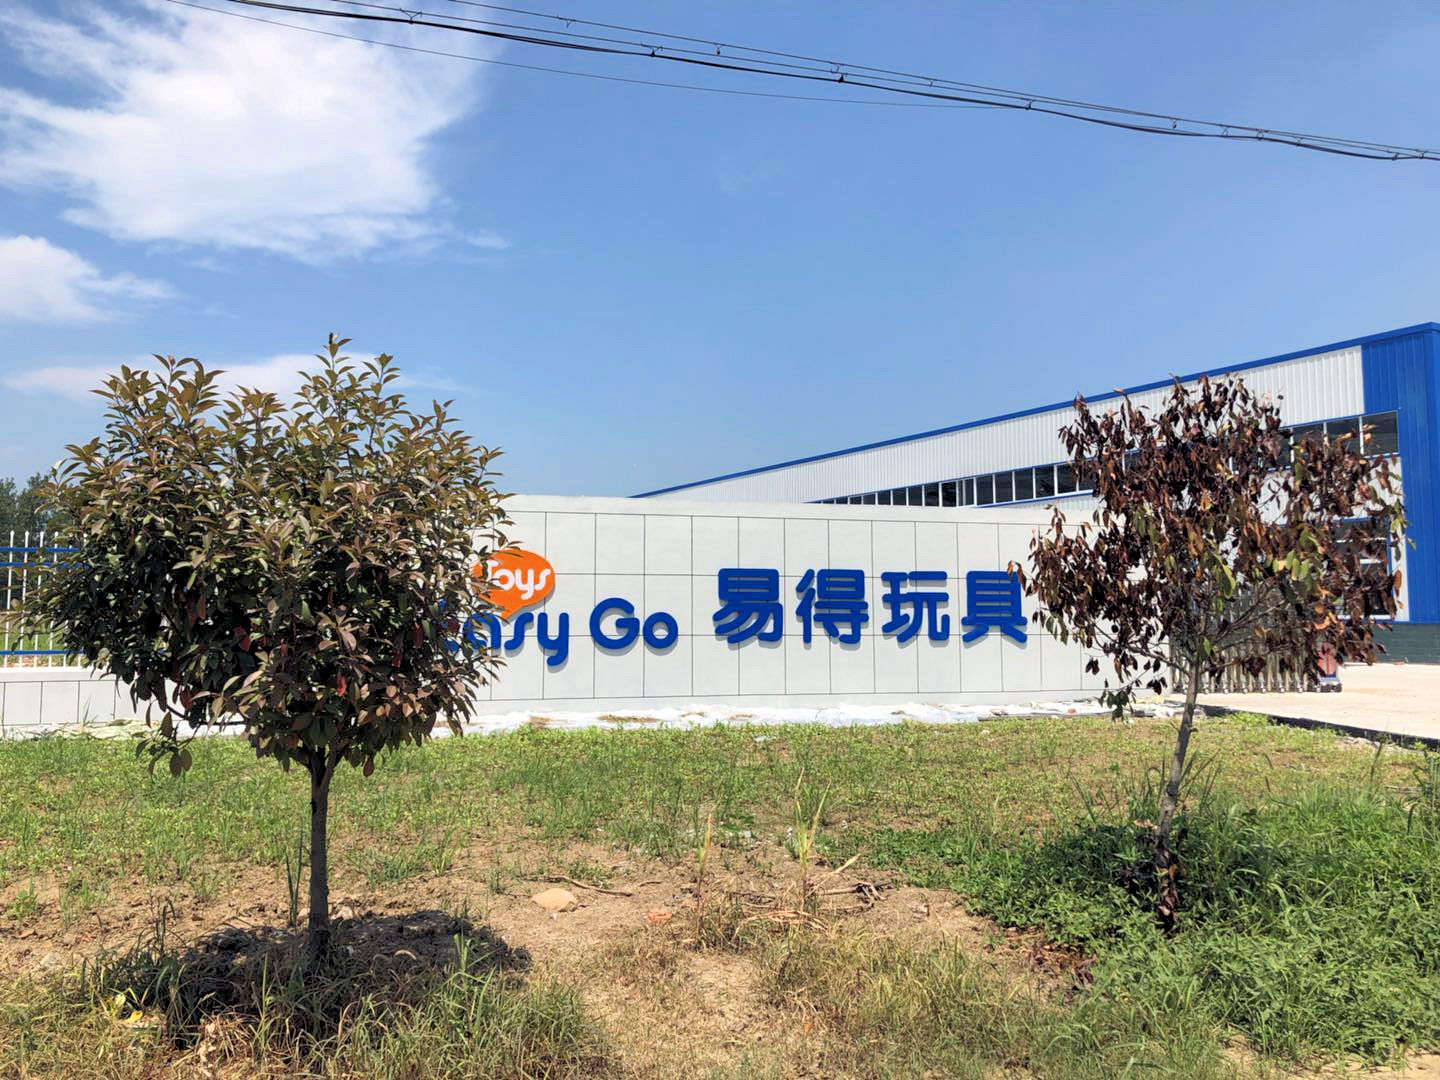 Welcome to our new factory